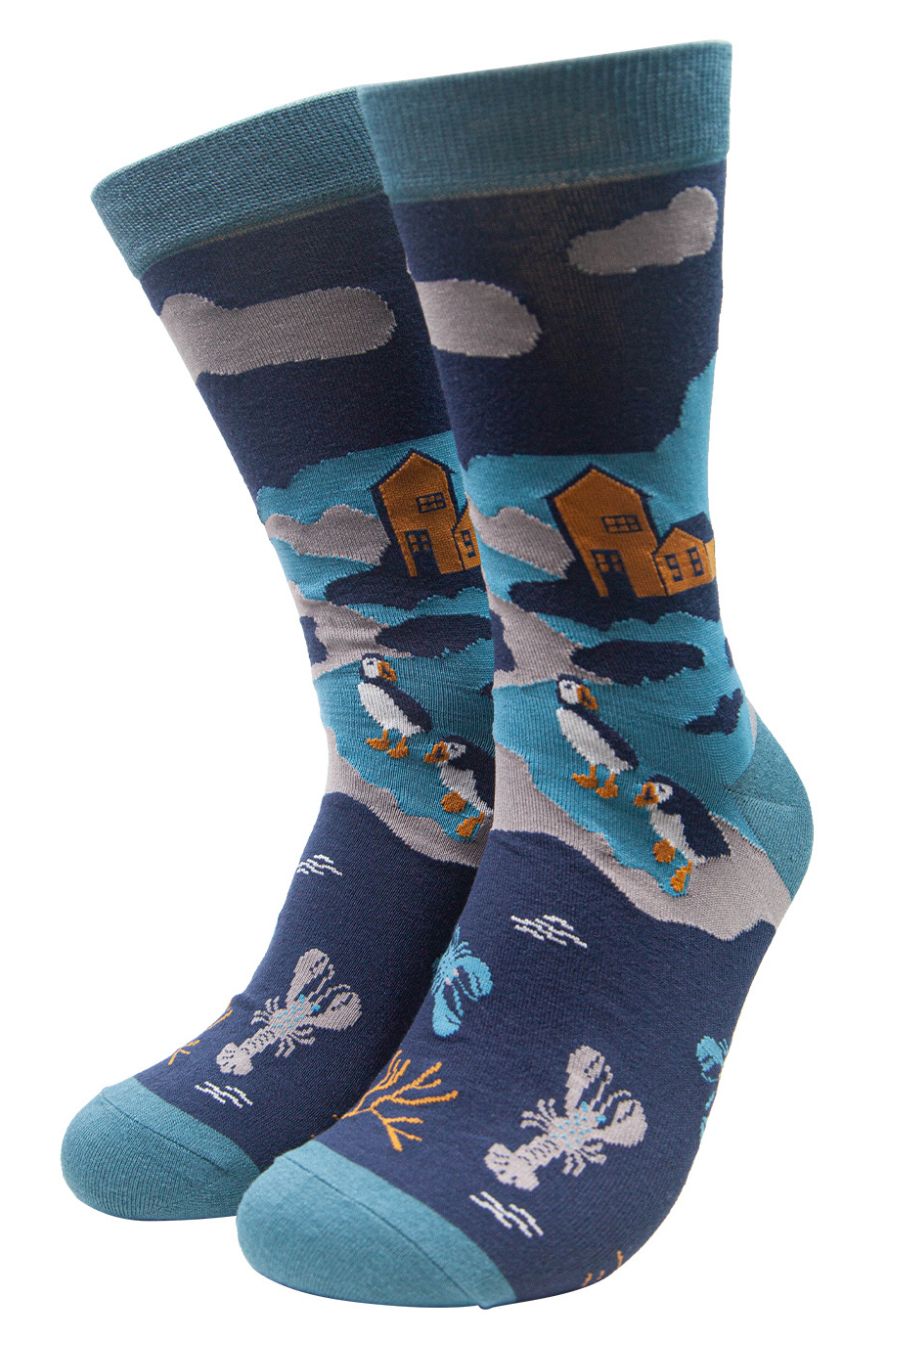 blue socks designed to look like a shoreline with waves, lobsters, puffins and houses